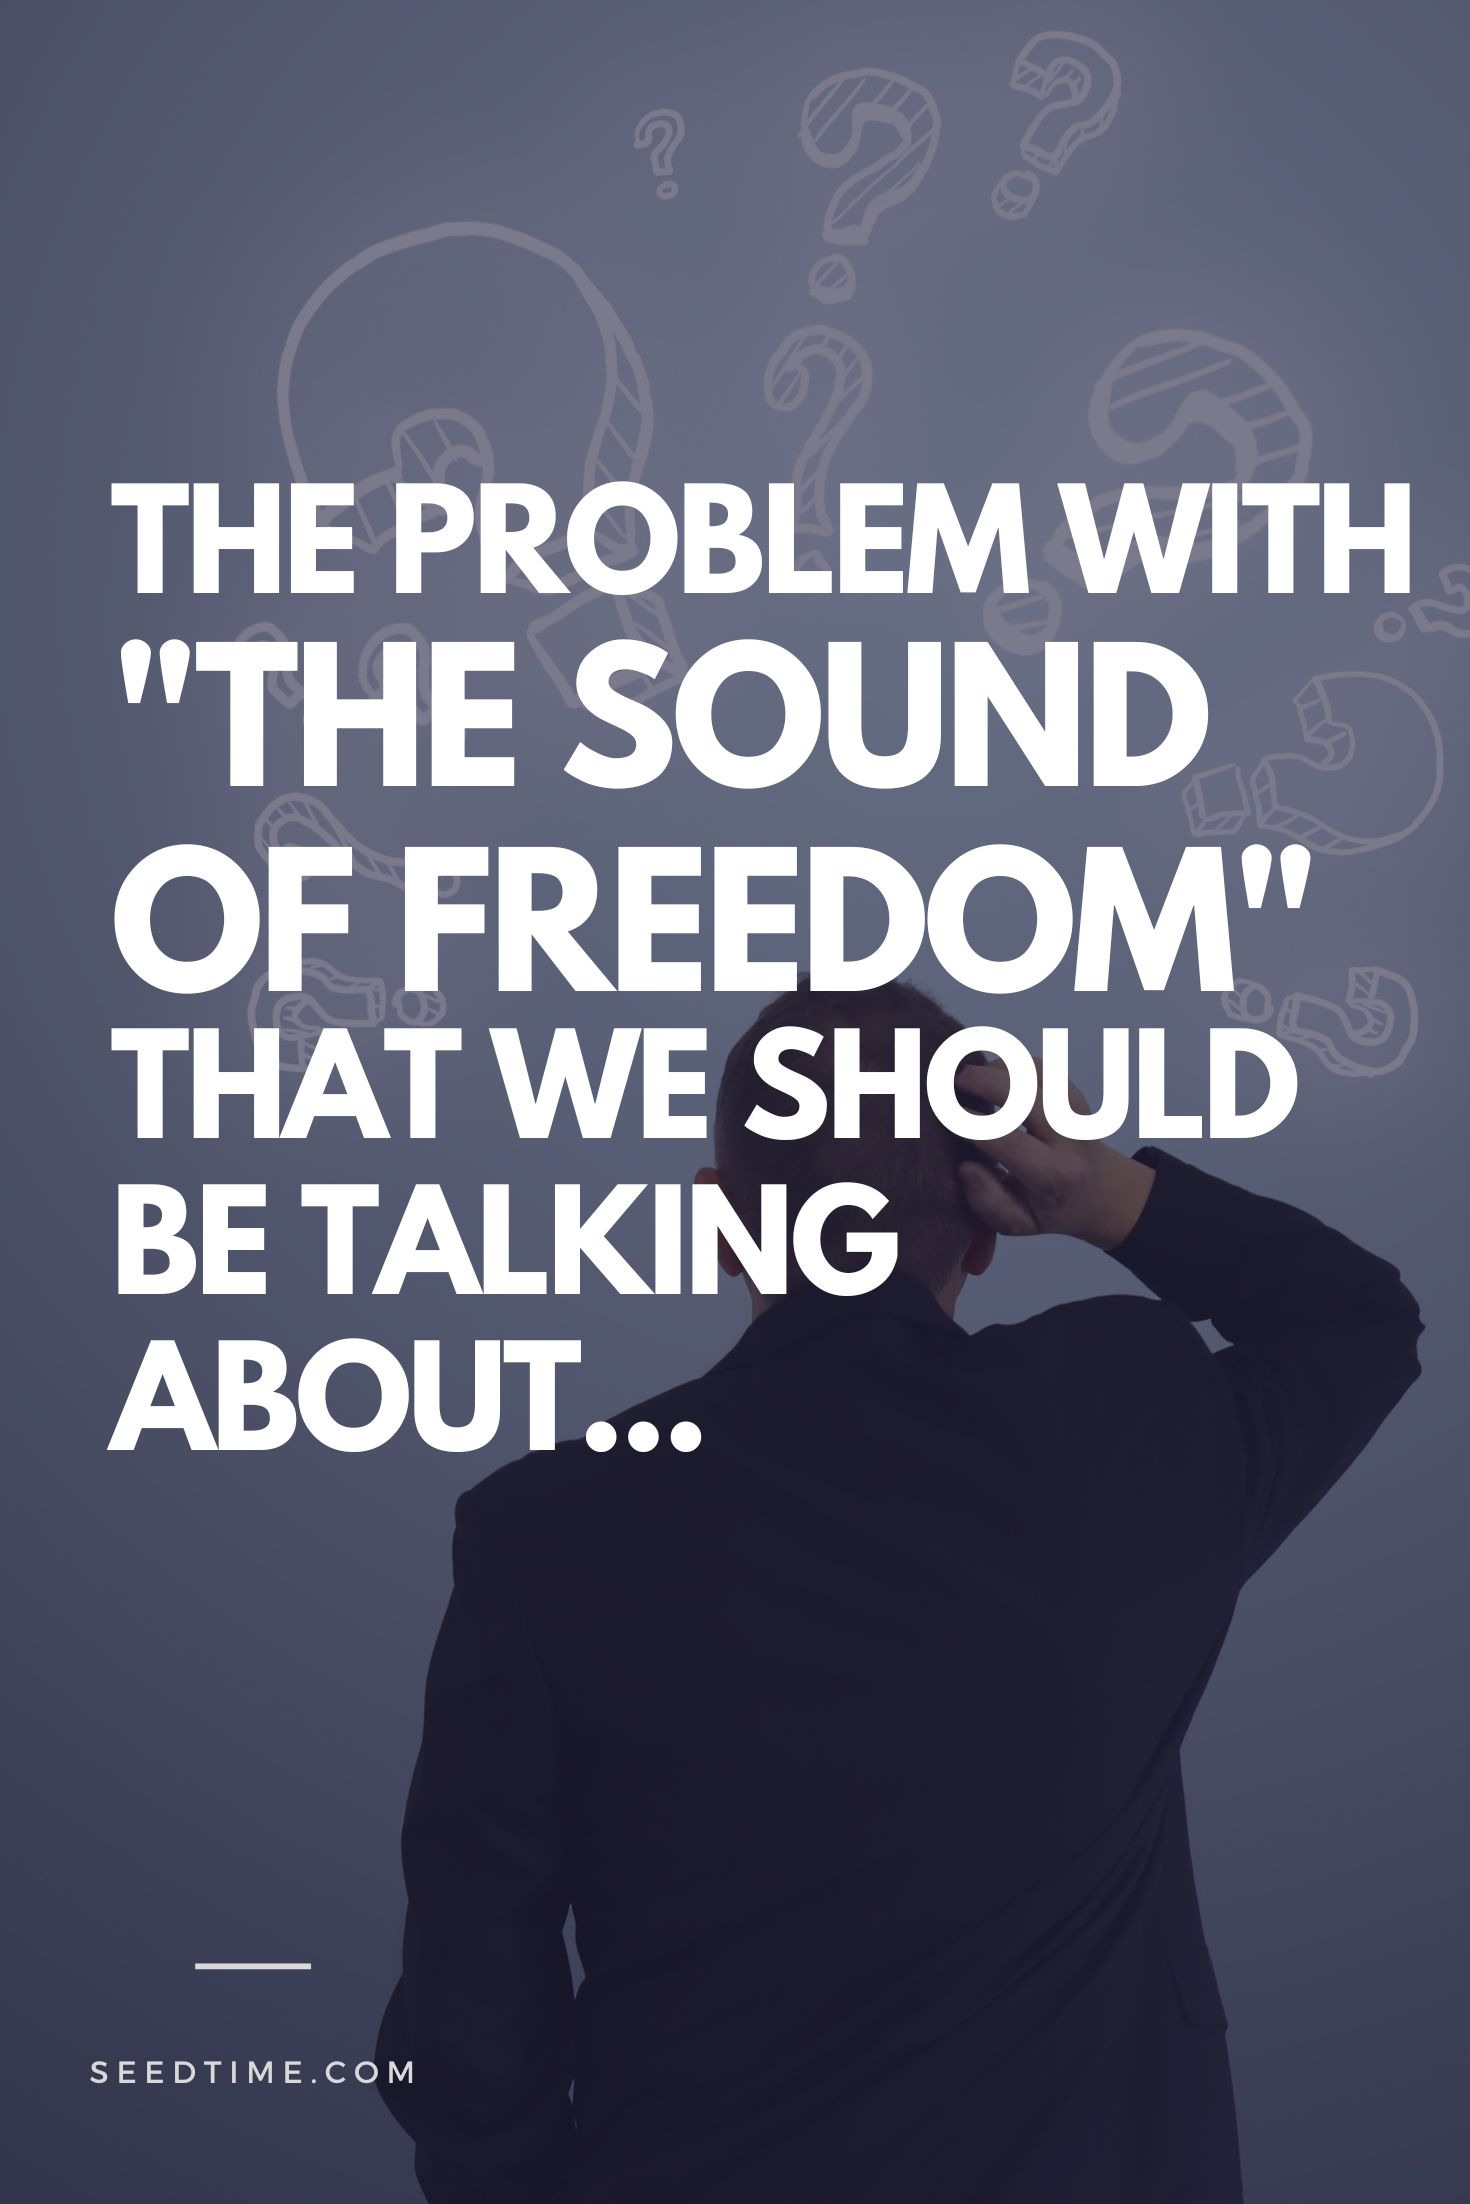 The problem with The Sound of Freedom that we should be talking about